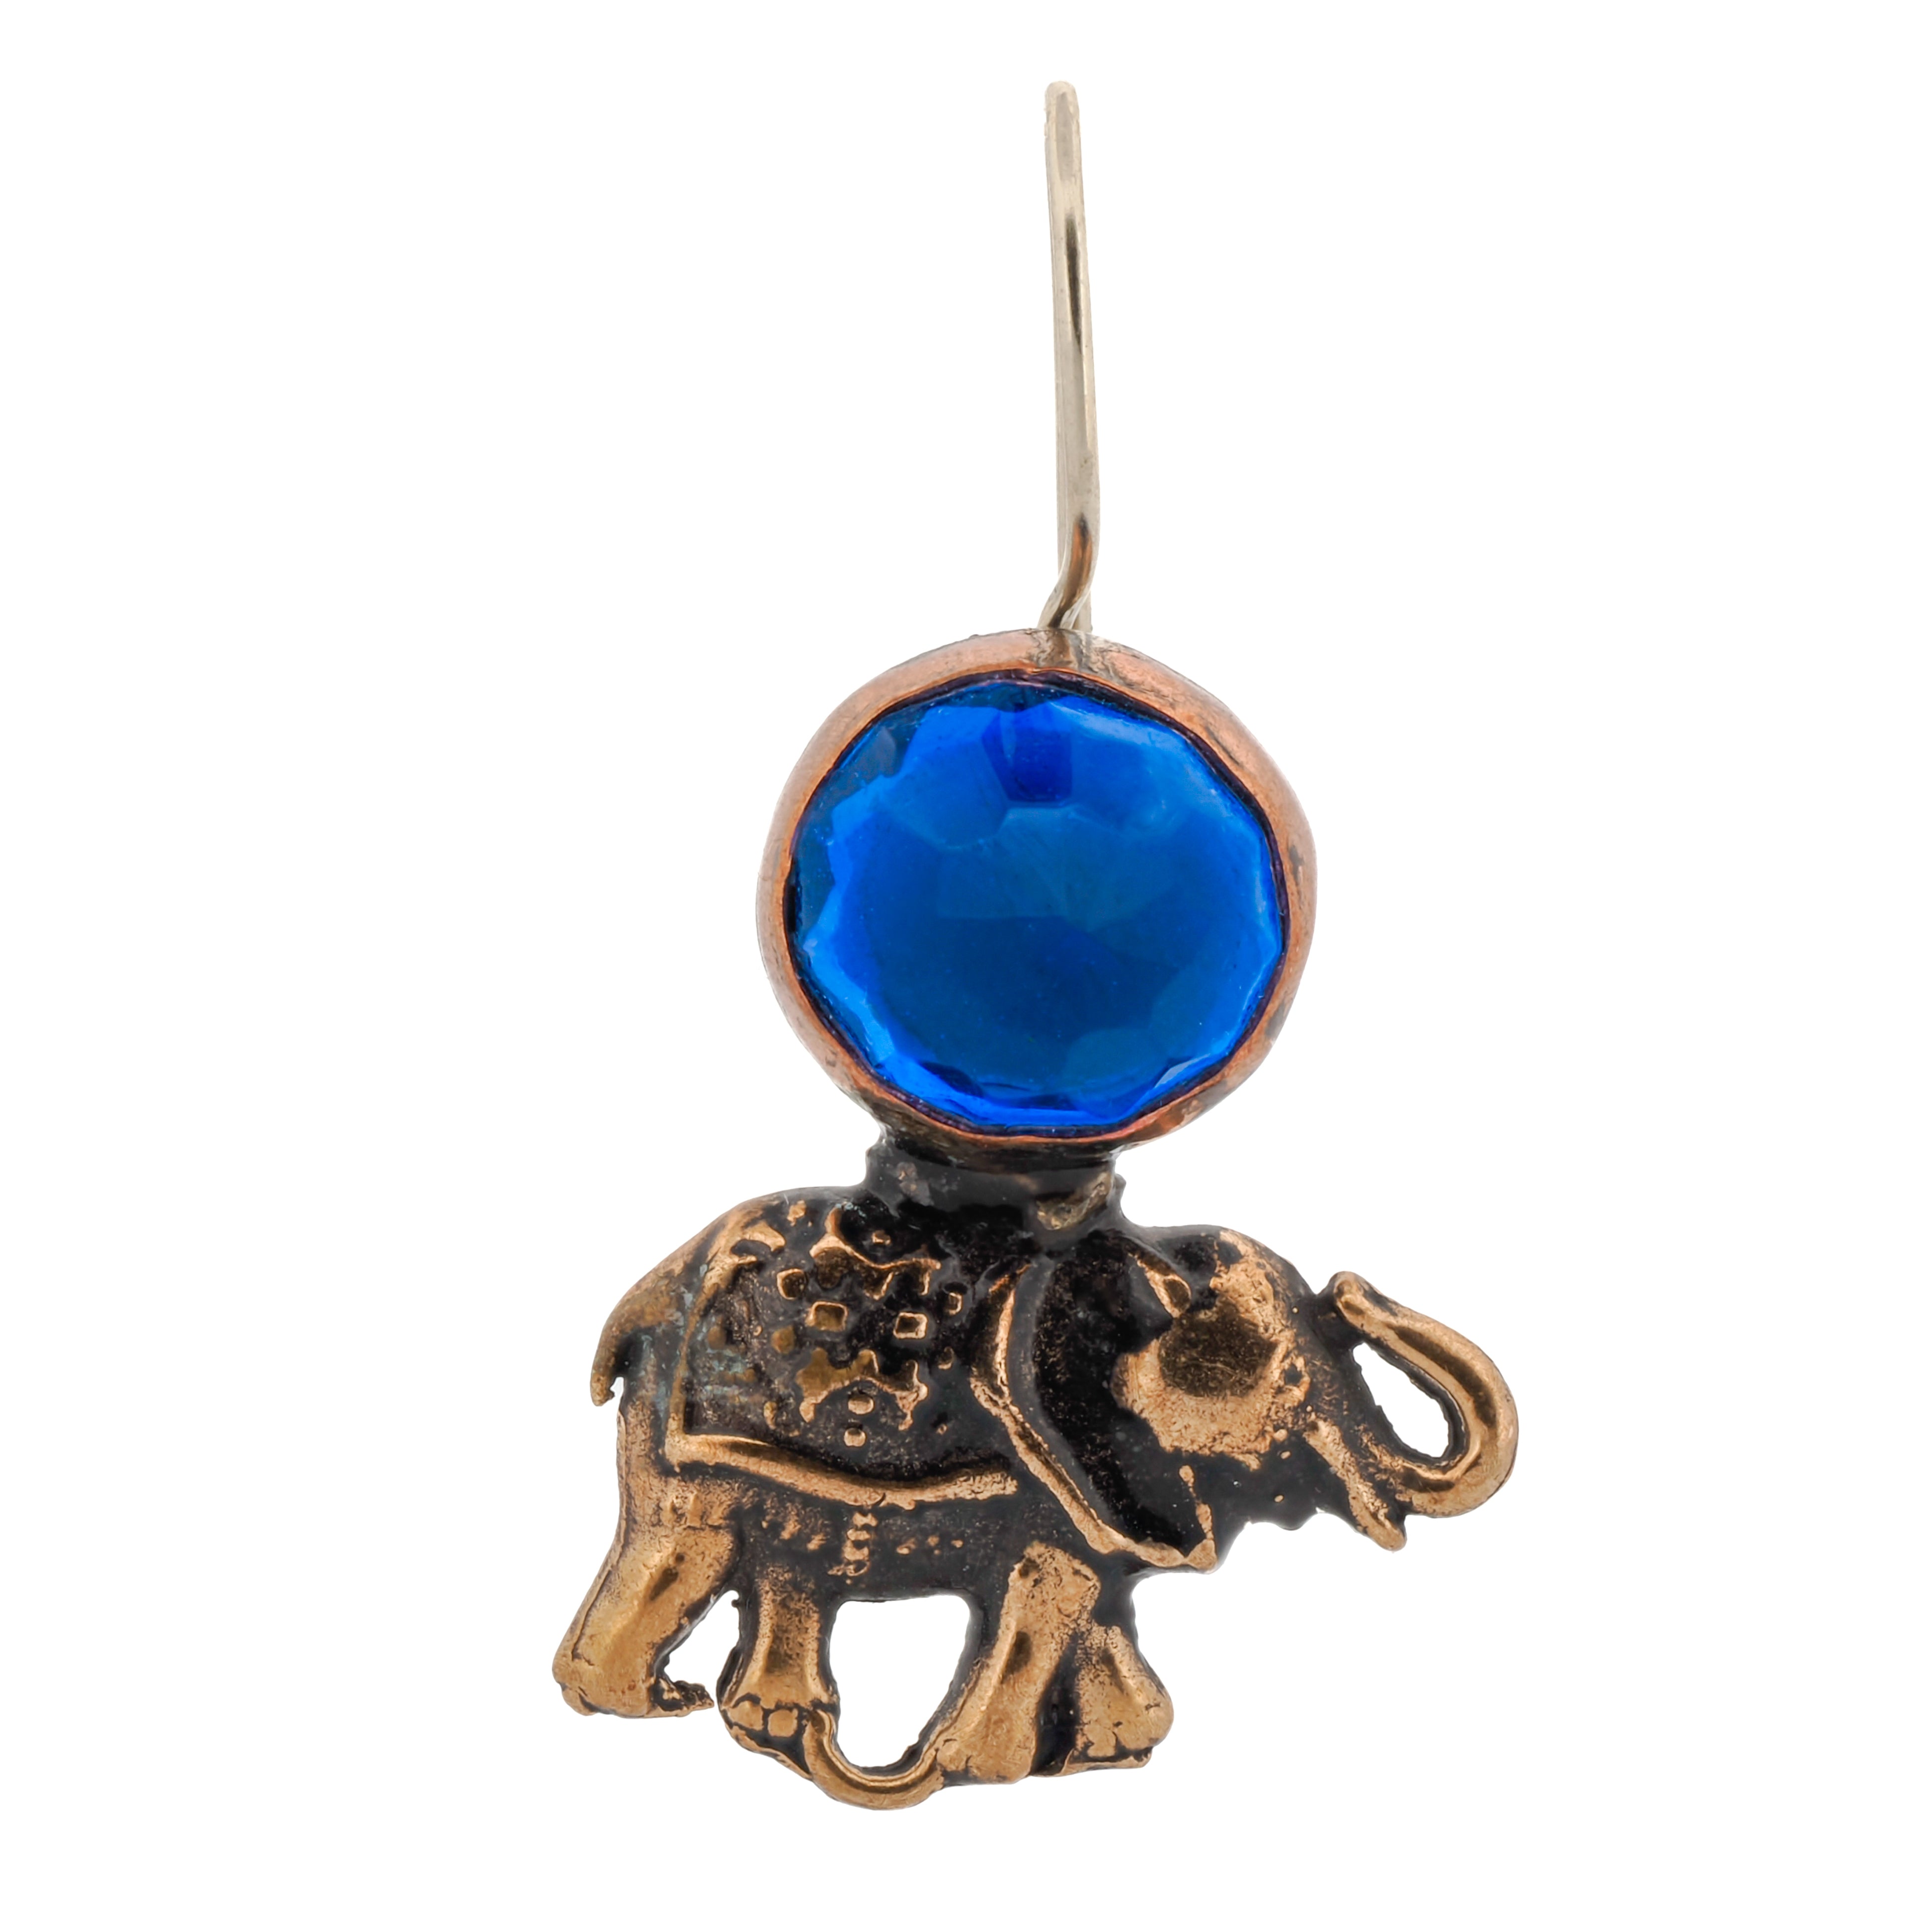 Artisanal Handmade Elephant Earrings with sapphire gemstones and bronze charms, a testament to creativity and skill.